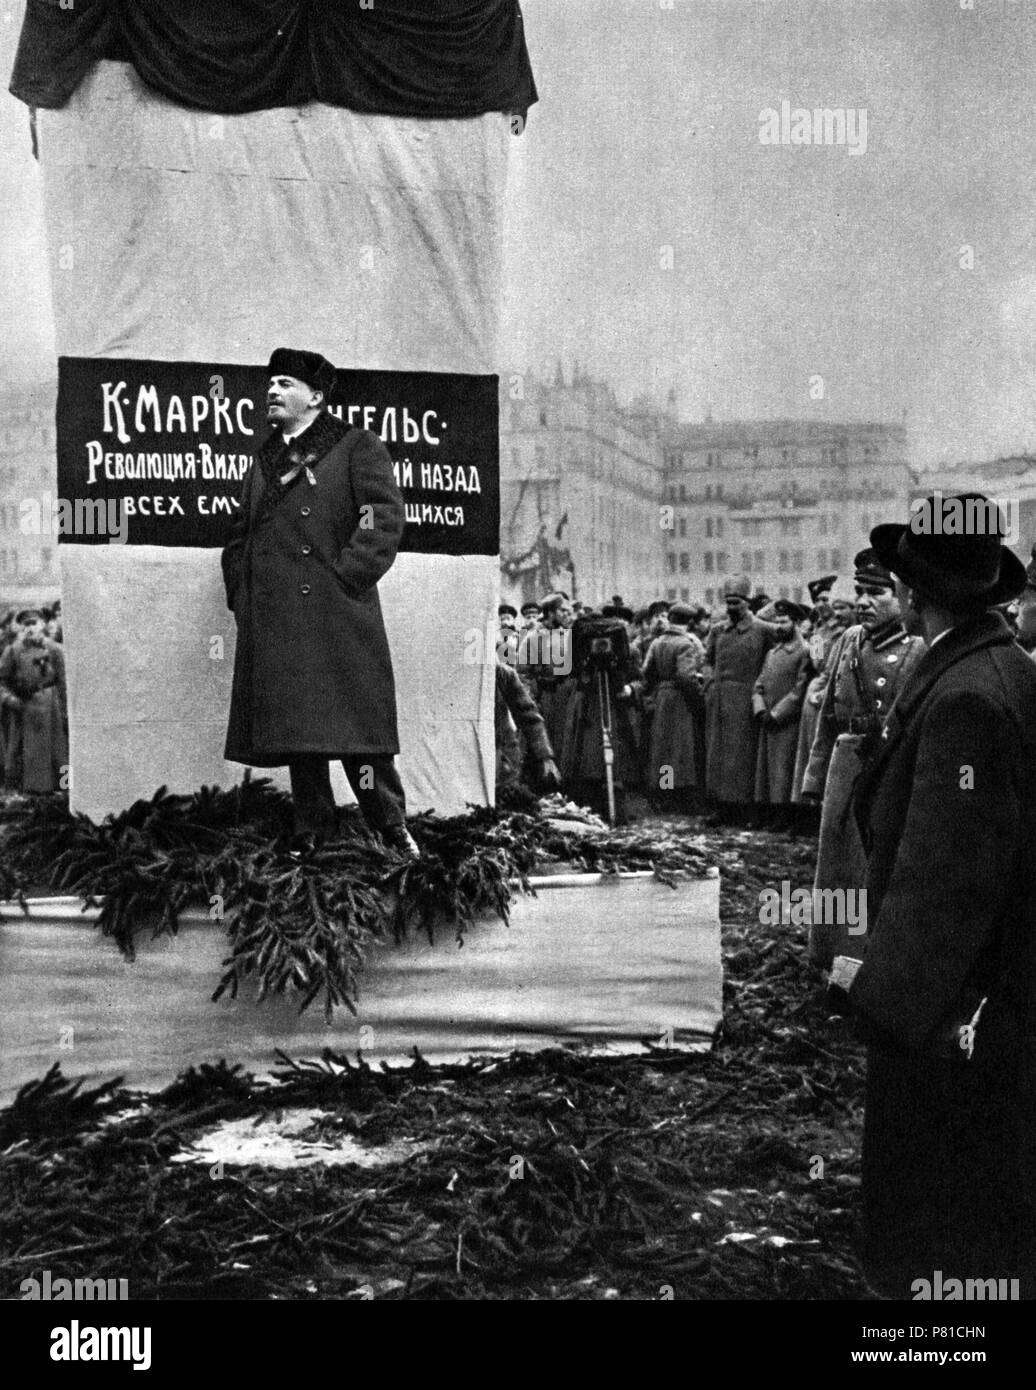 Vladimir Lenin at the Marx and Engels monument dedication on Nevember 7, 1918. Museum: State History Museum, Moscow. Stock Photo